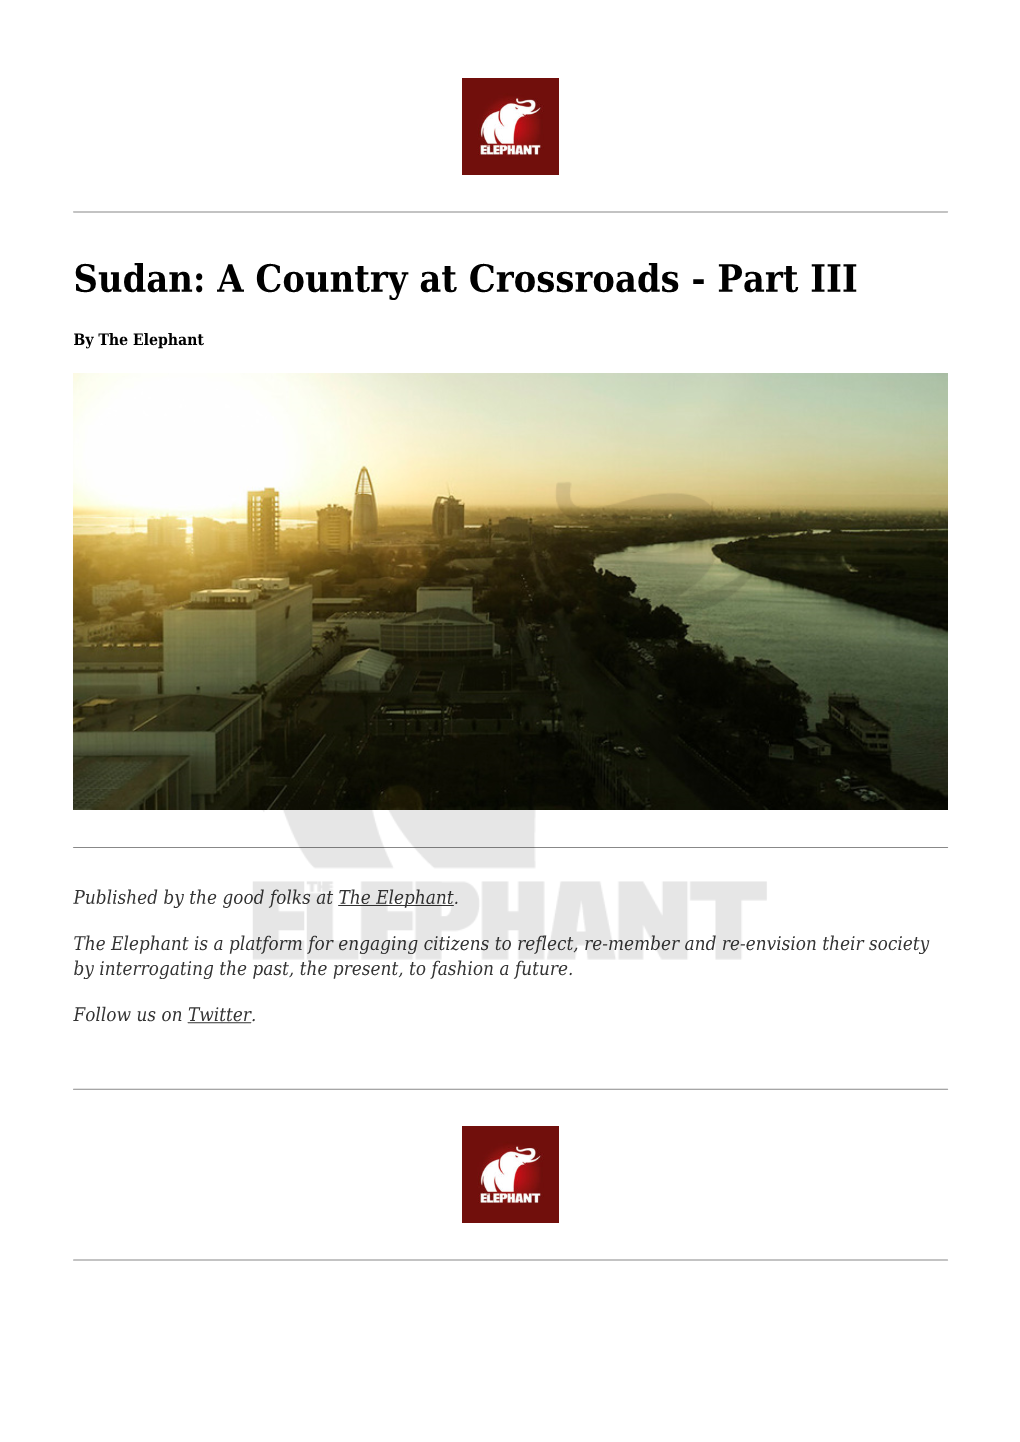 Part III,Sudan: a Country at Crossroads &#8211